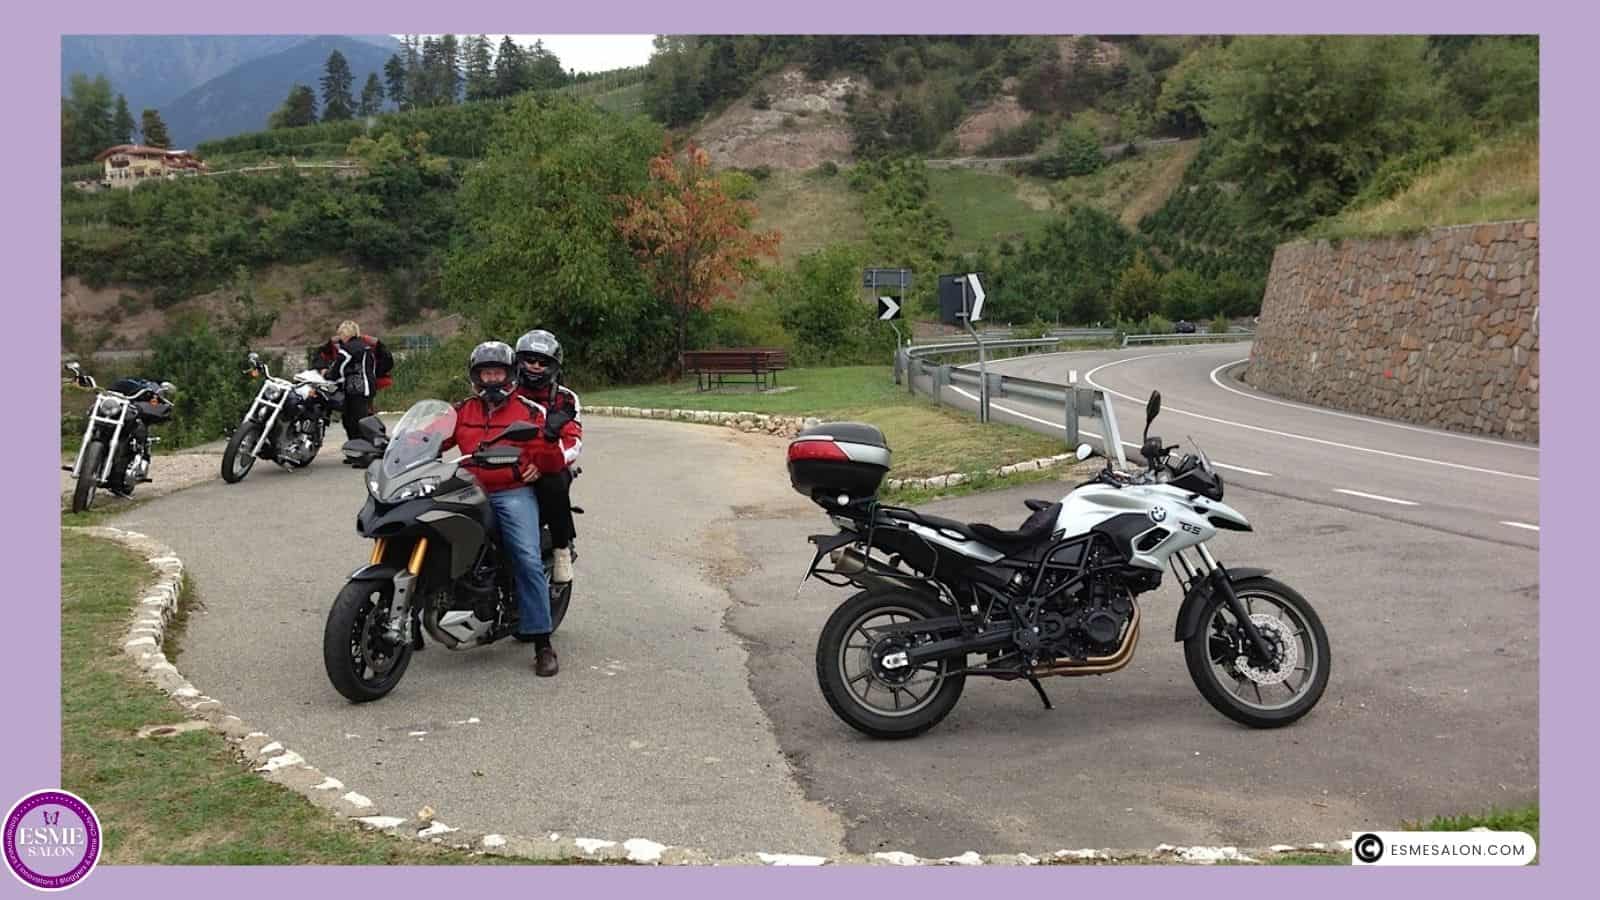 an image of Esme and Husband on motor bike trip in Italy